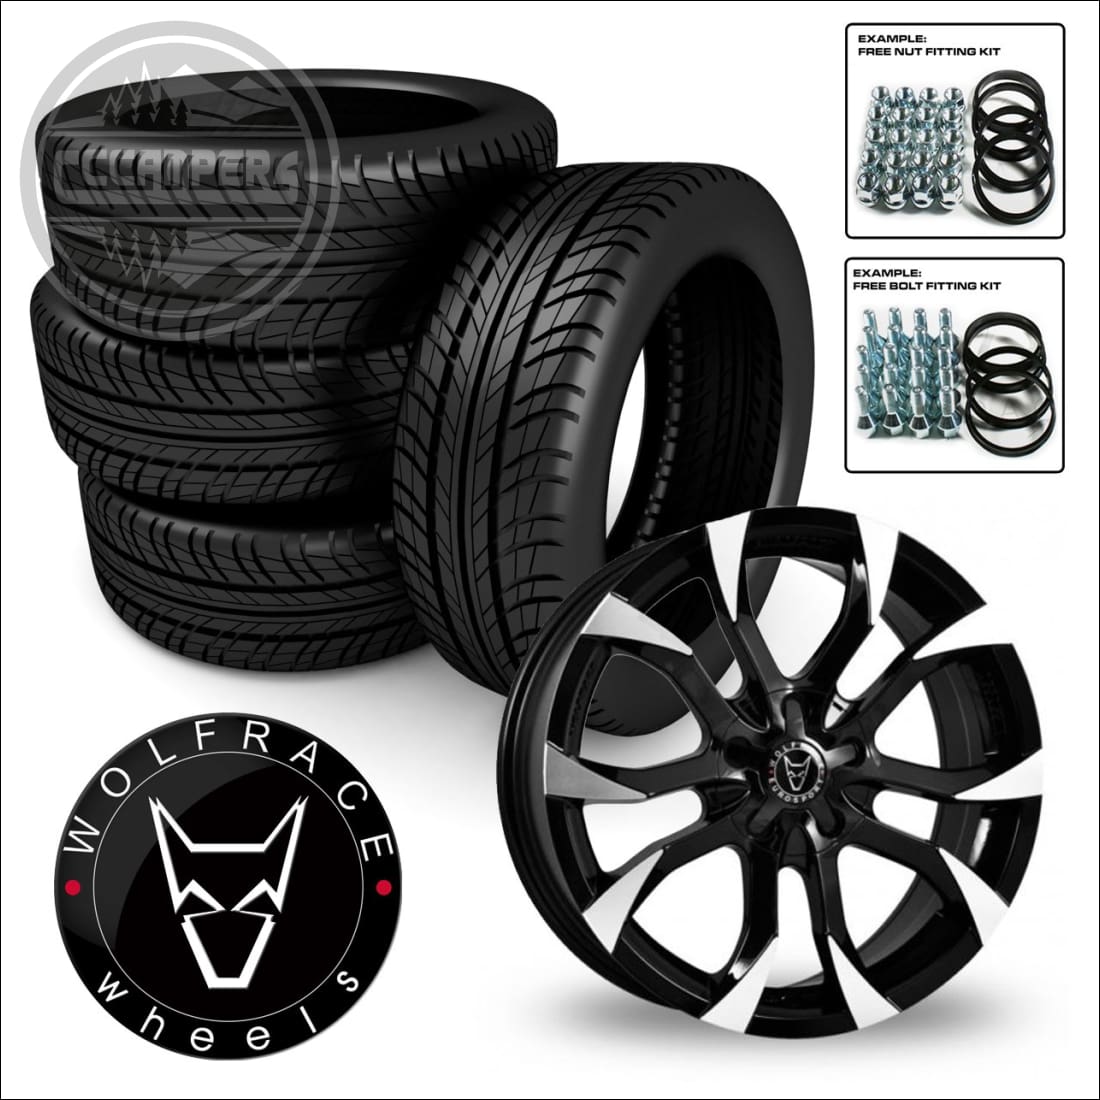 WOLFRACE ASSASSIN 18" load rated alloy wheel and tyre package 14> on Renault Trafic, Vauxhall Vivaro, Nissan NV300 & Fiat Talento - cccampers.myshopify.com